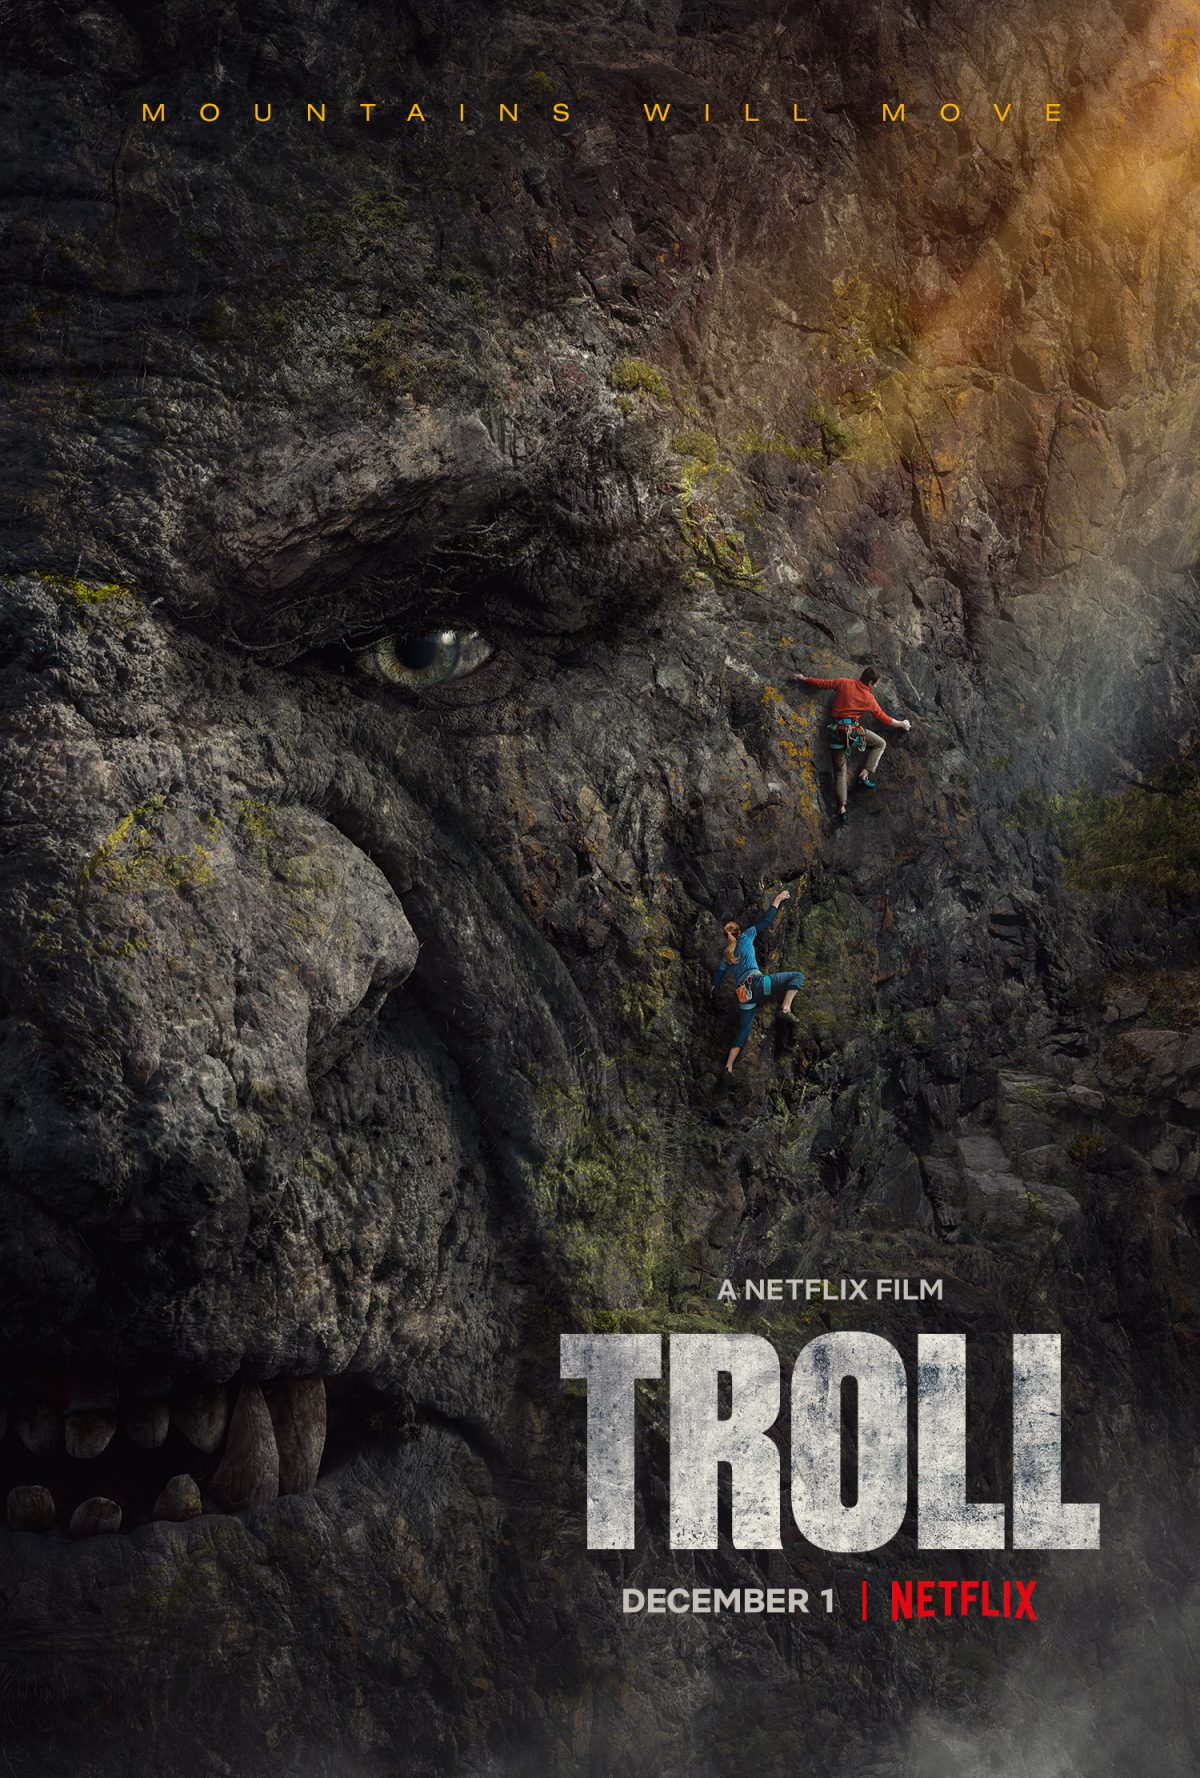 TROLL (2022): Norse Legend Leaps To Life